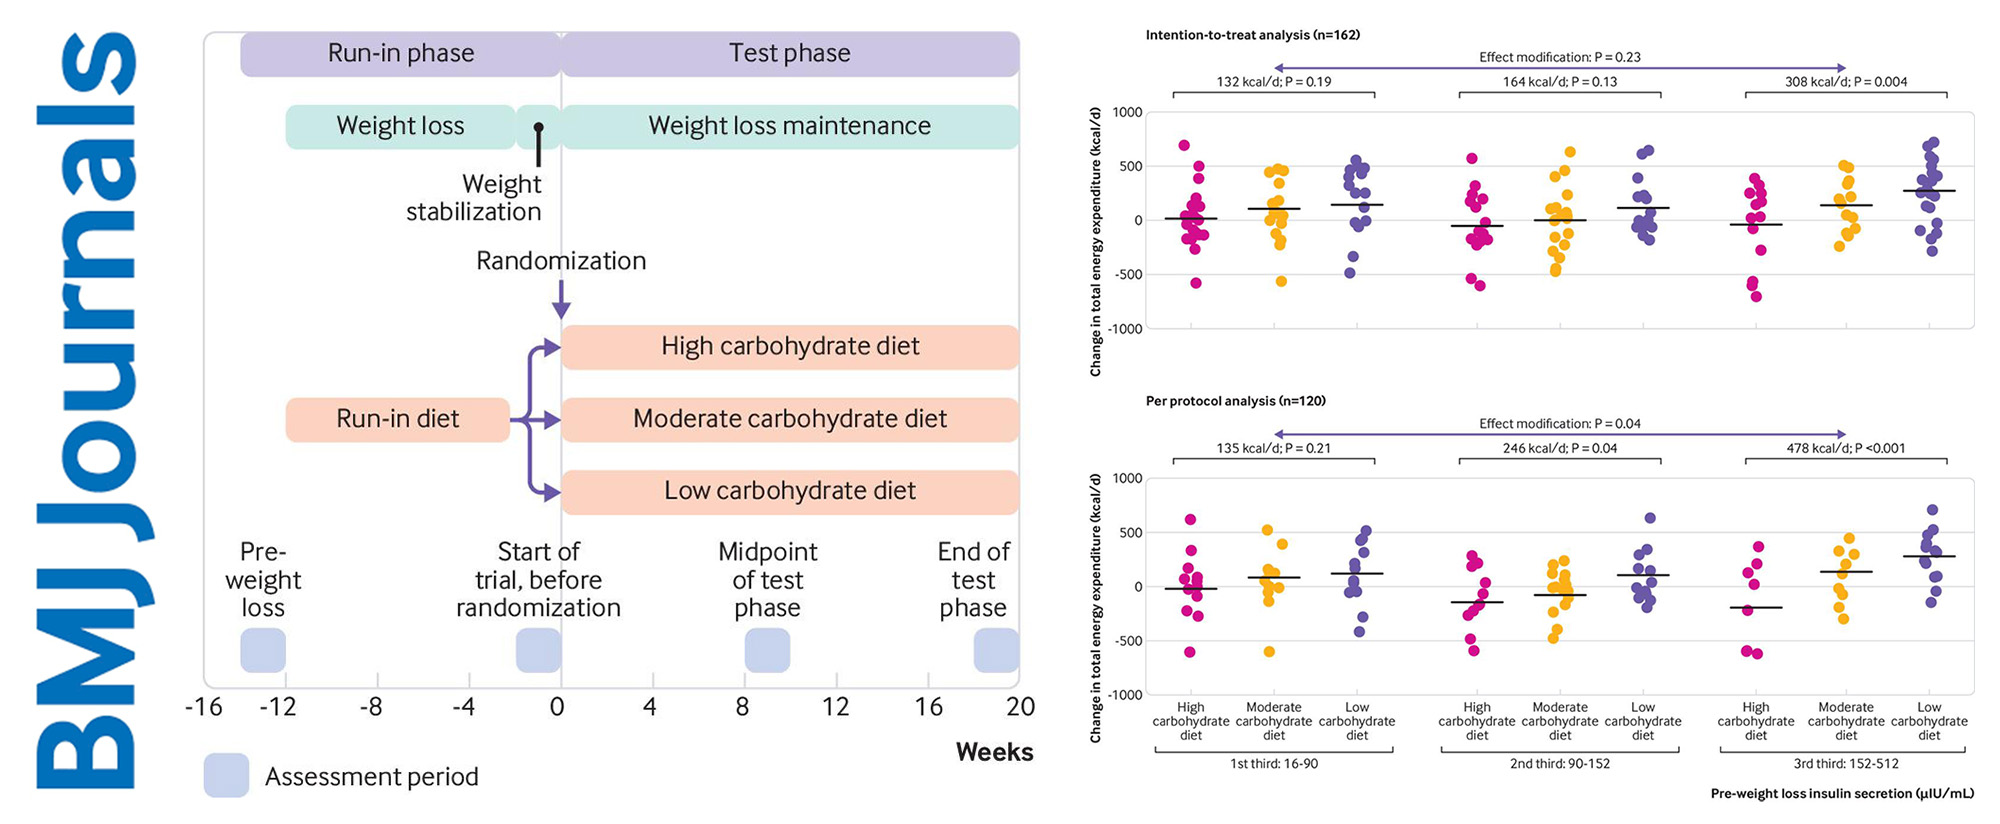 Effects of a low carbohydrate diet on energy expenditure during weight loss maintenance: randomized trial